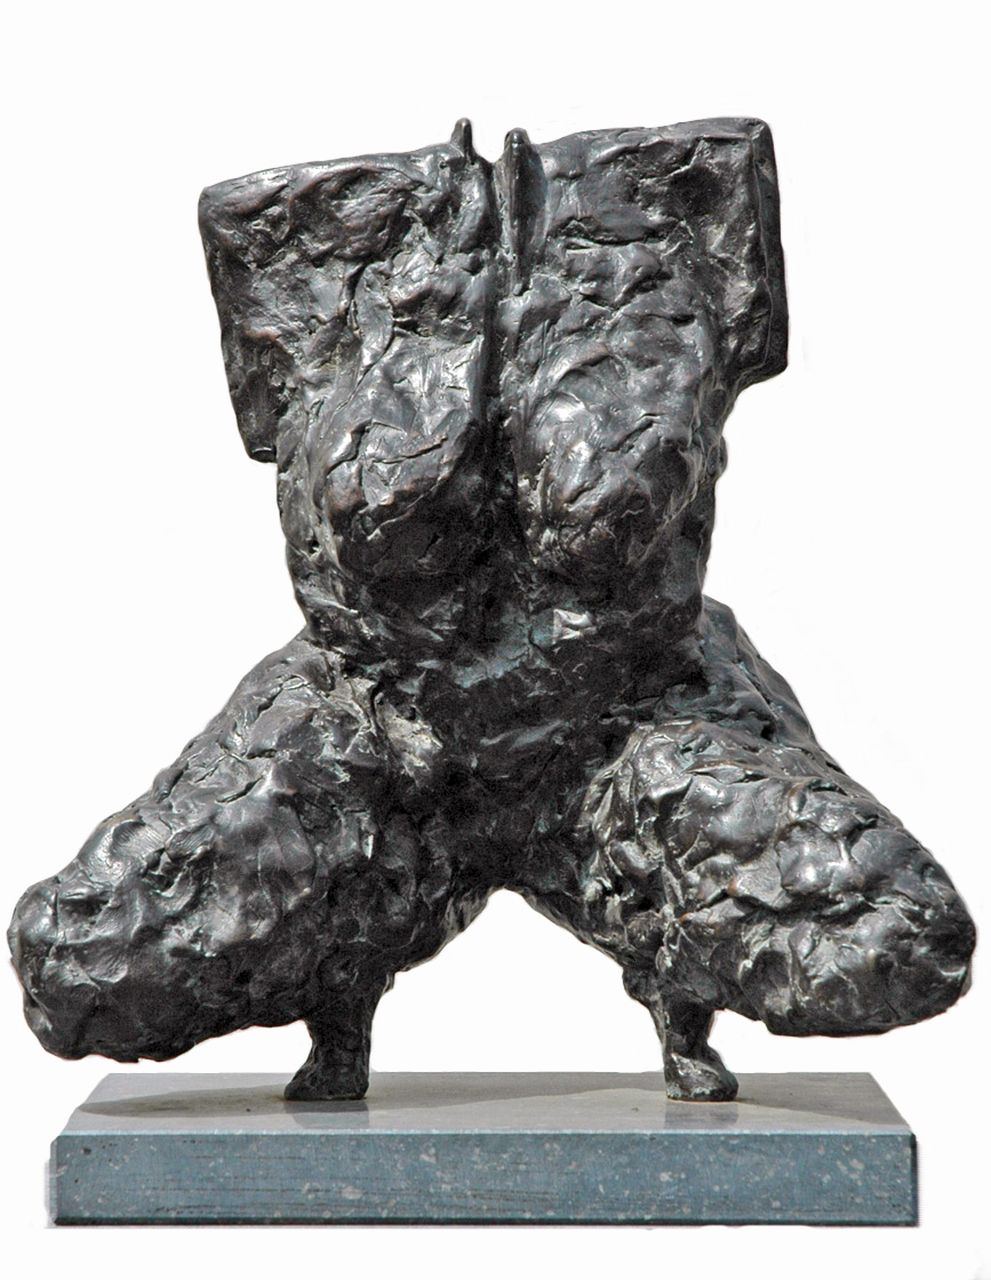 LeRoy A.  | Antoinette LeRoy, Innana, Bronze 30,3 x 25,8 cm, signed with initials on right side of bottom